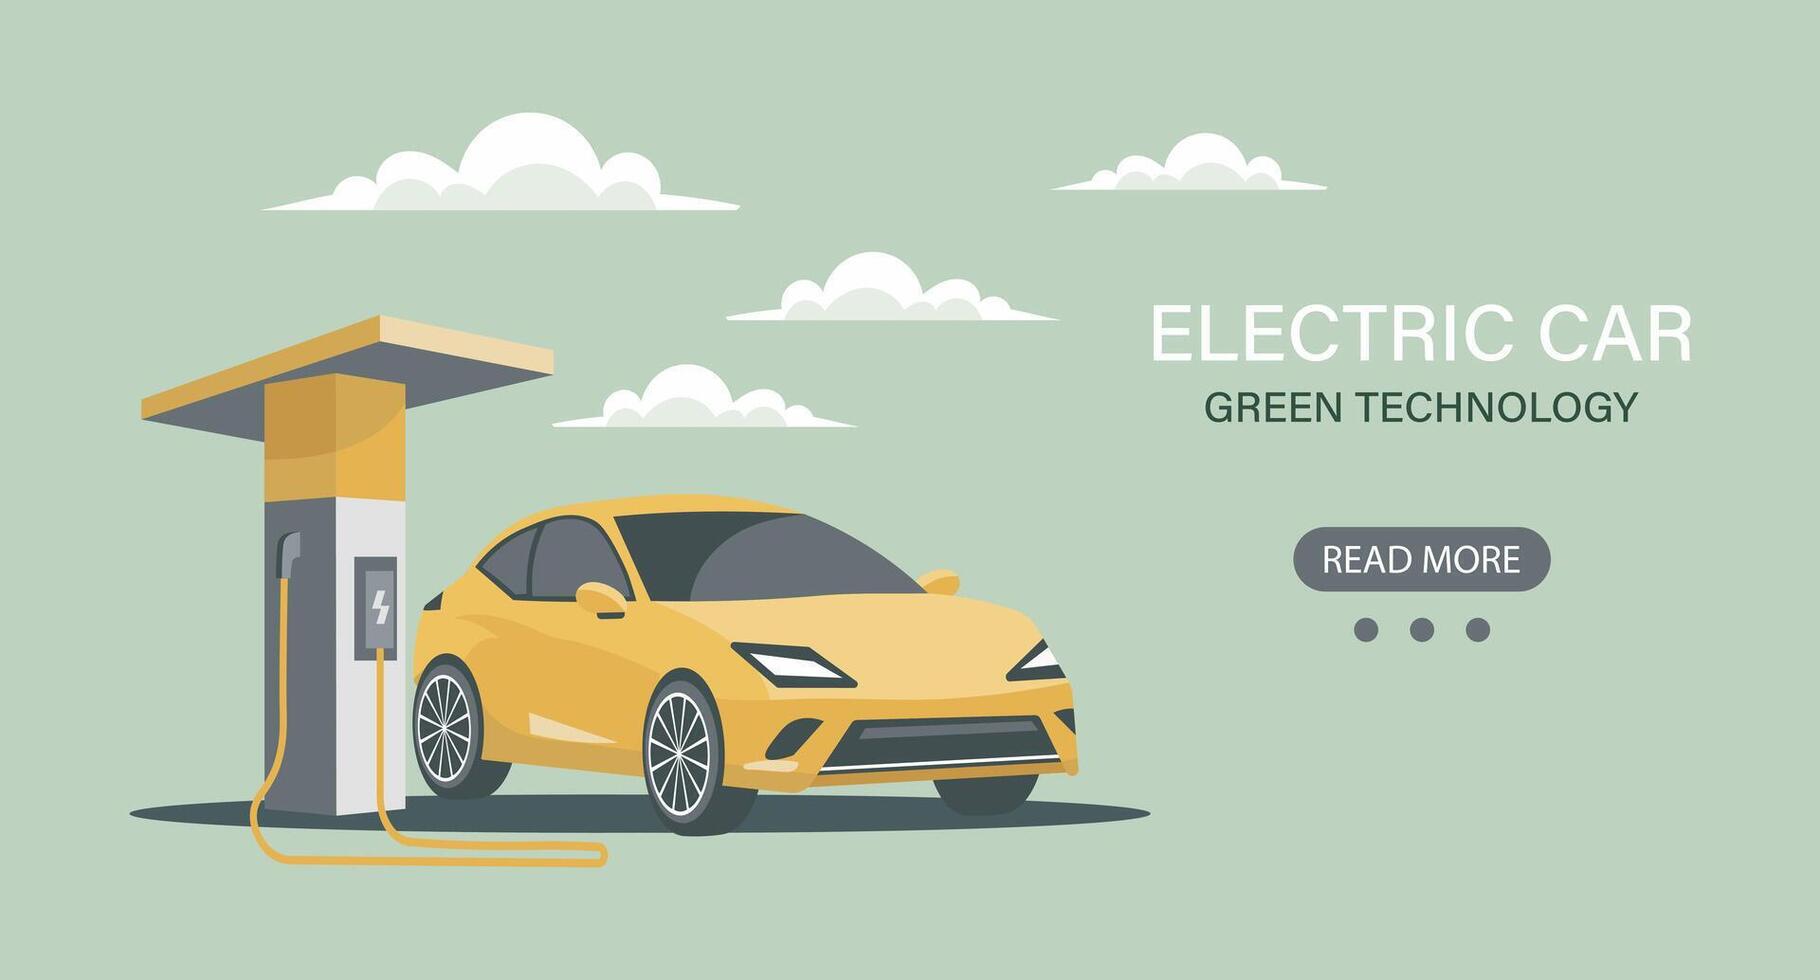 Modern electric car at a charging station. Green technology. Illustration, banner. Vector